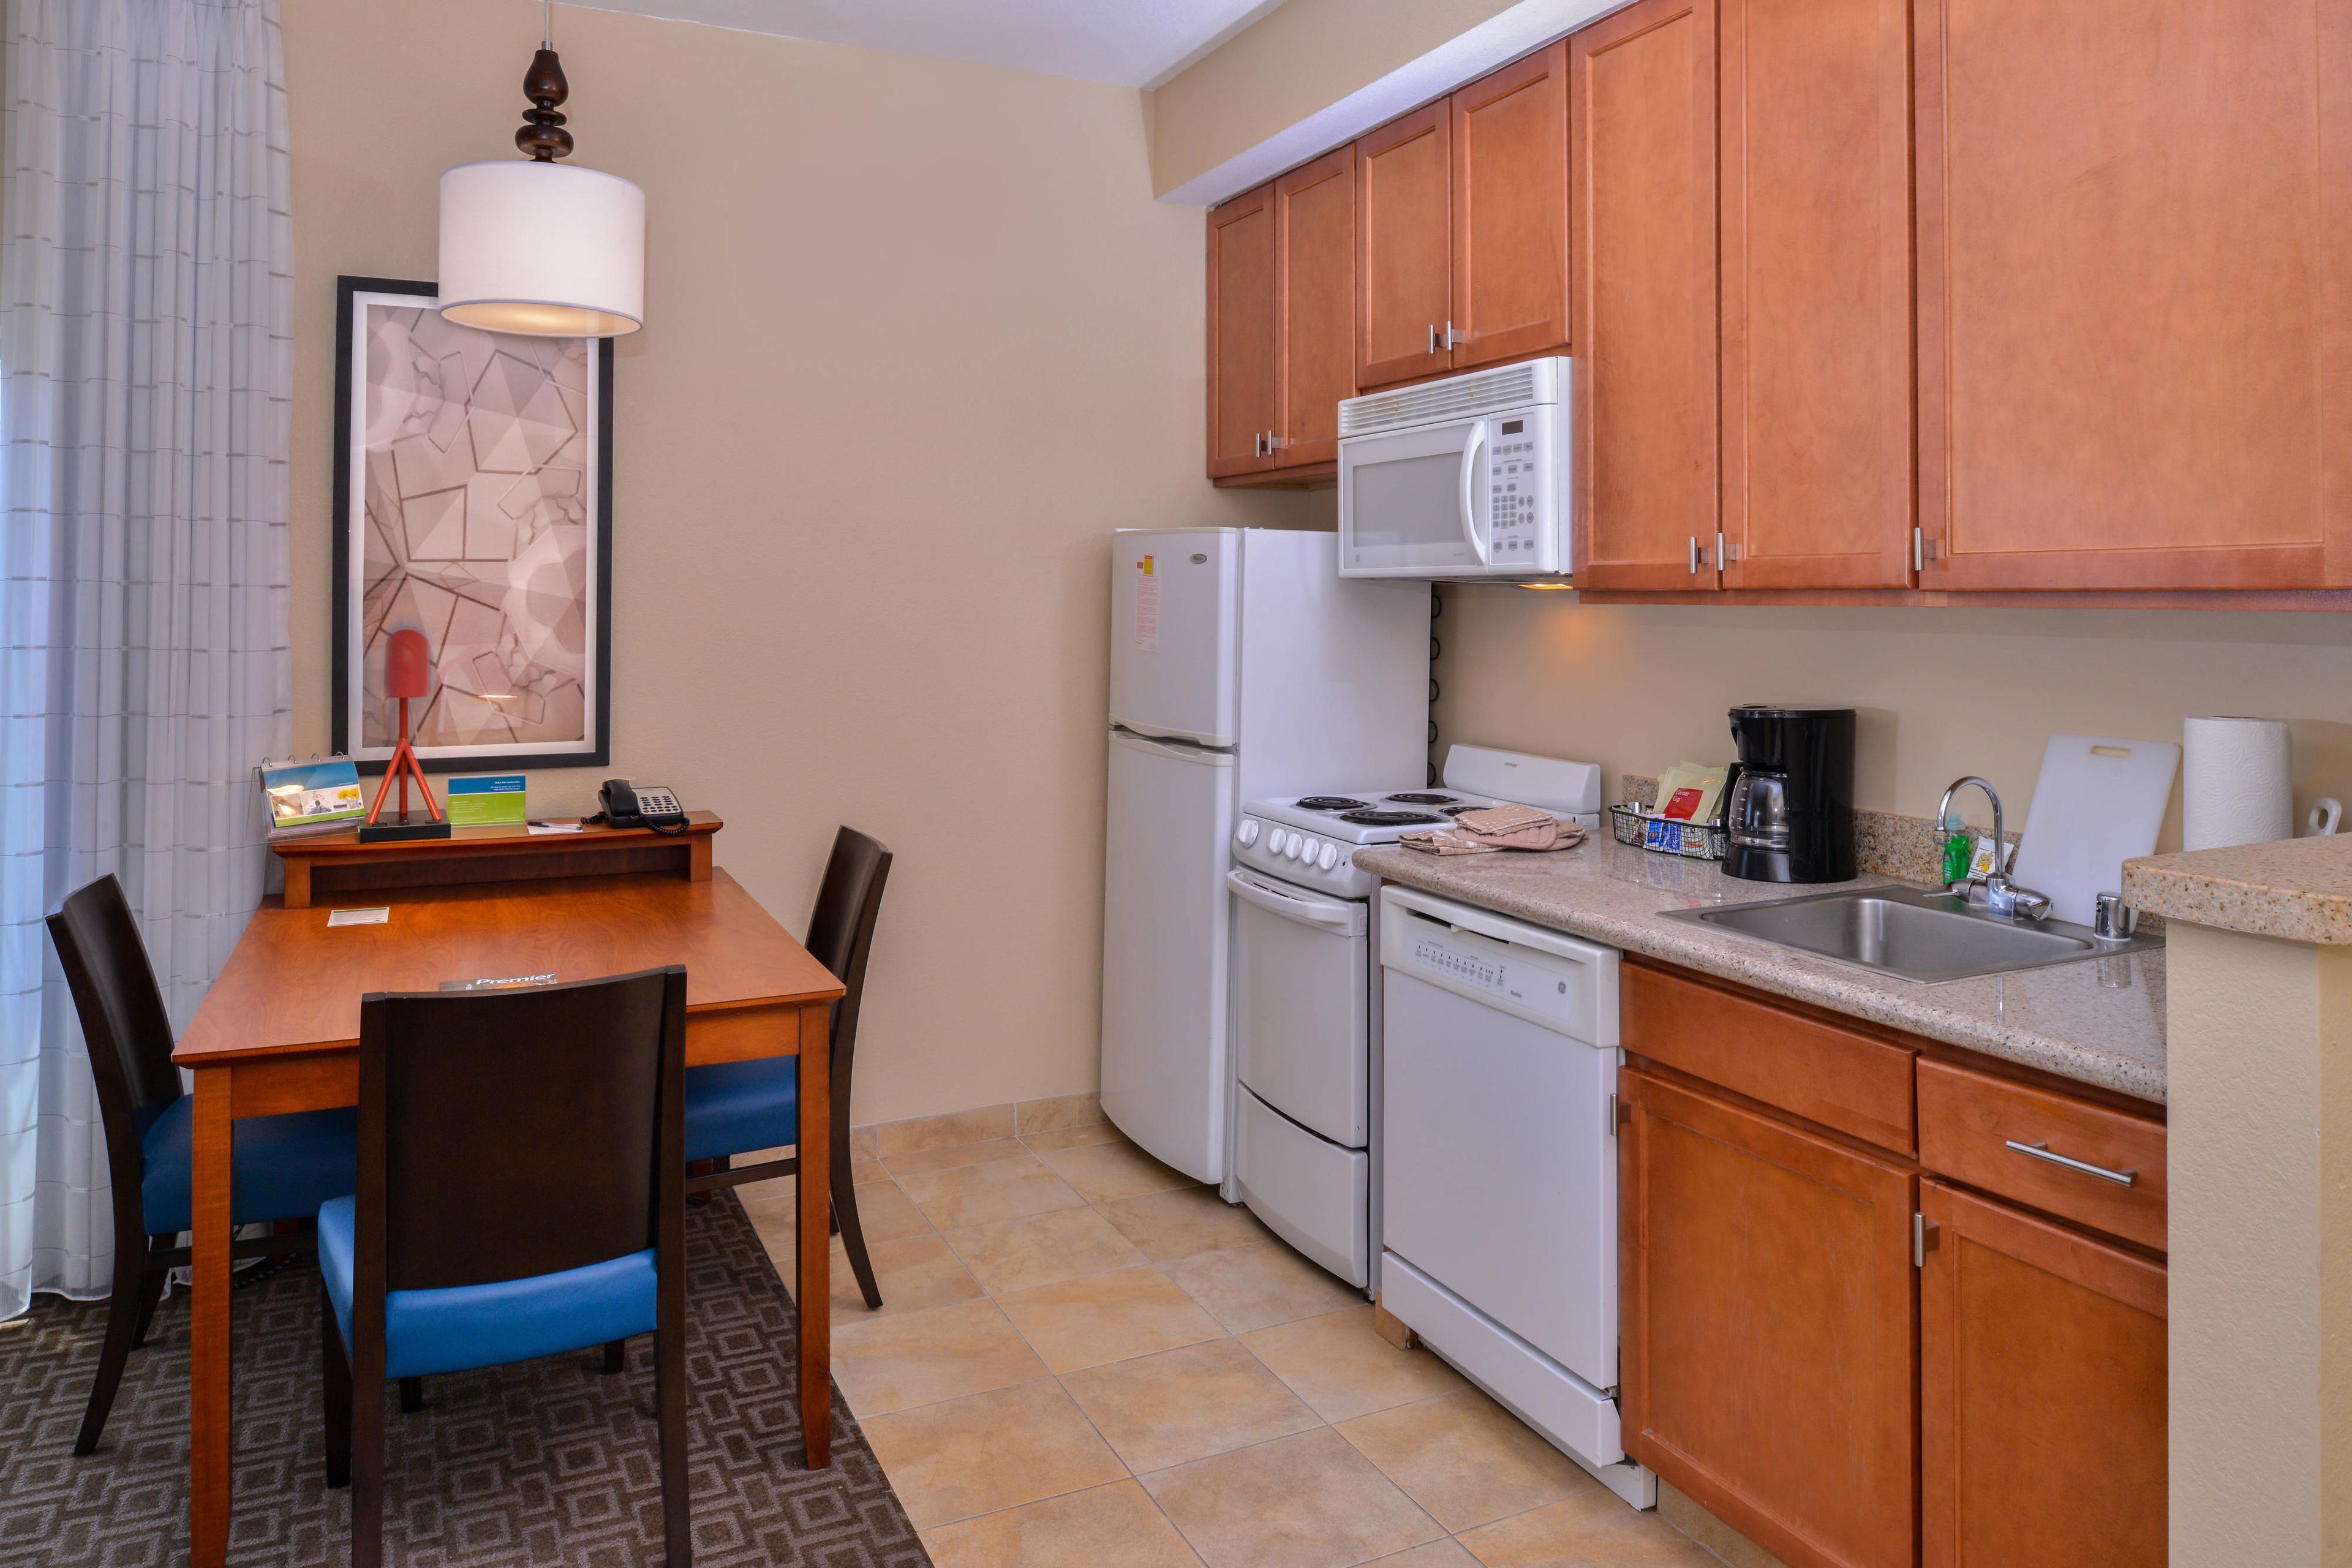 Now you can prepare your favorite meals on the road. Our One-Bedroom Suites come with a full kitchen that includes a full-size refrigerator, microwave, dishwasher, and oven.